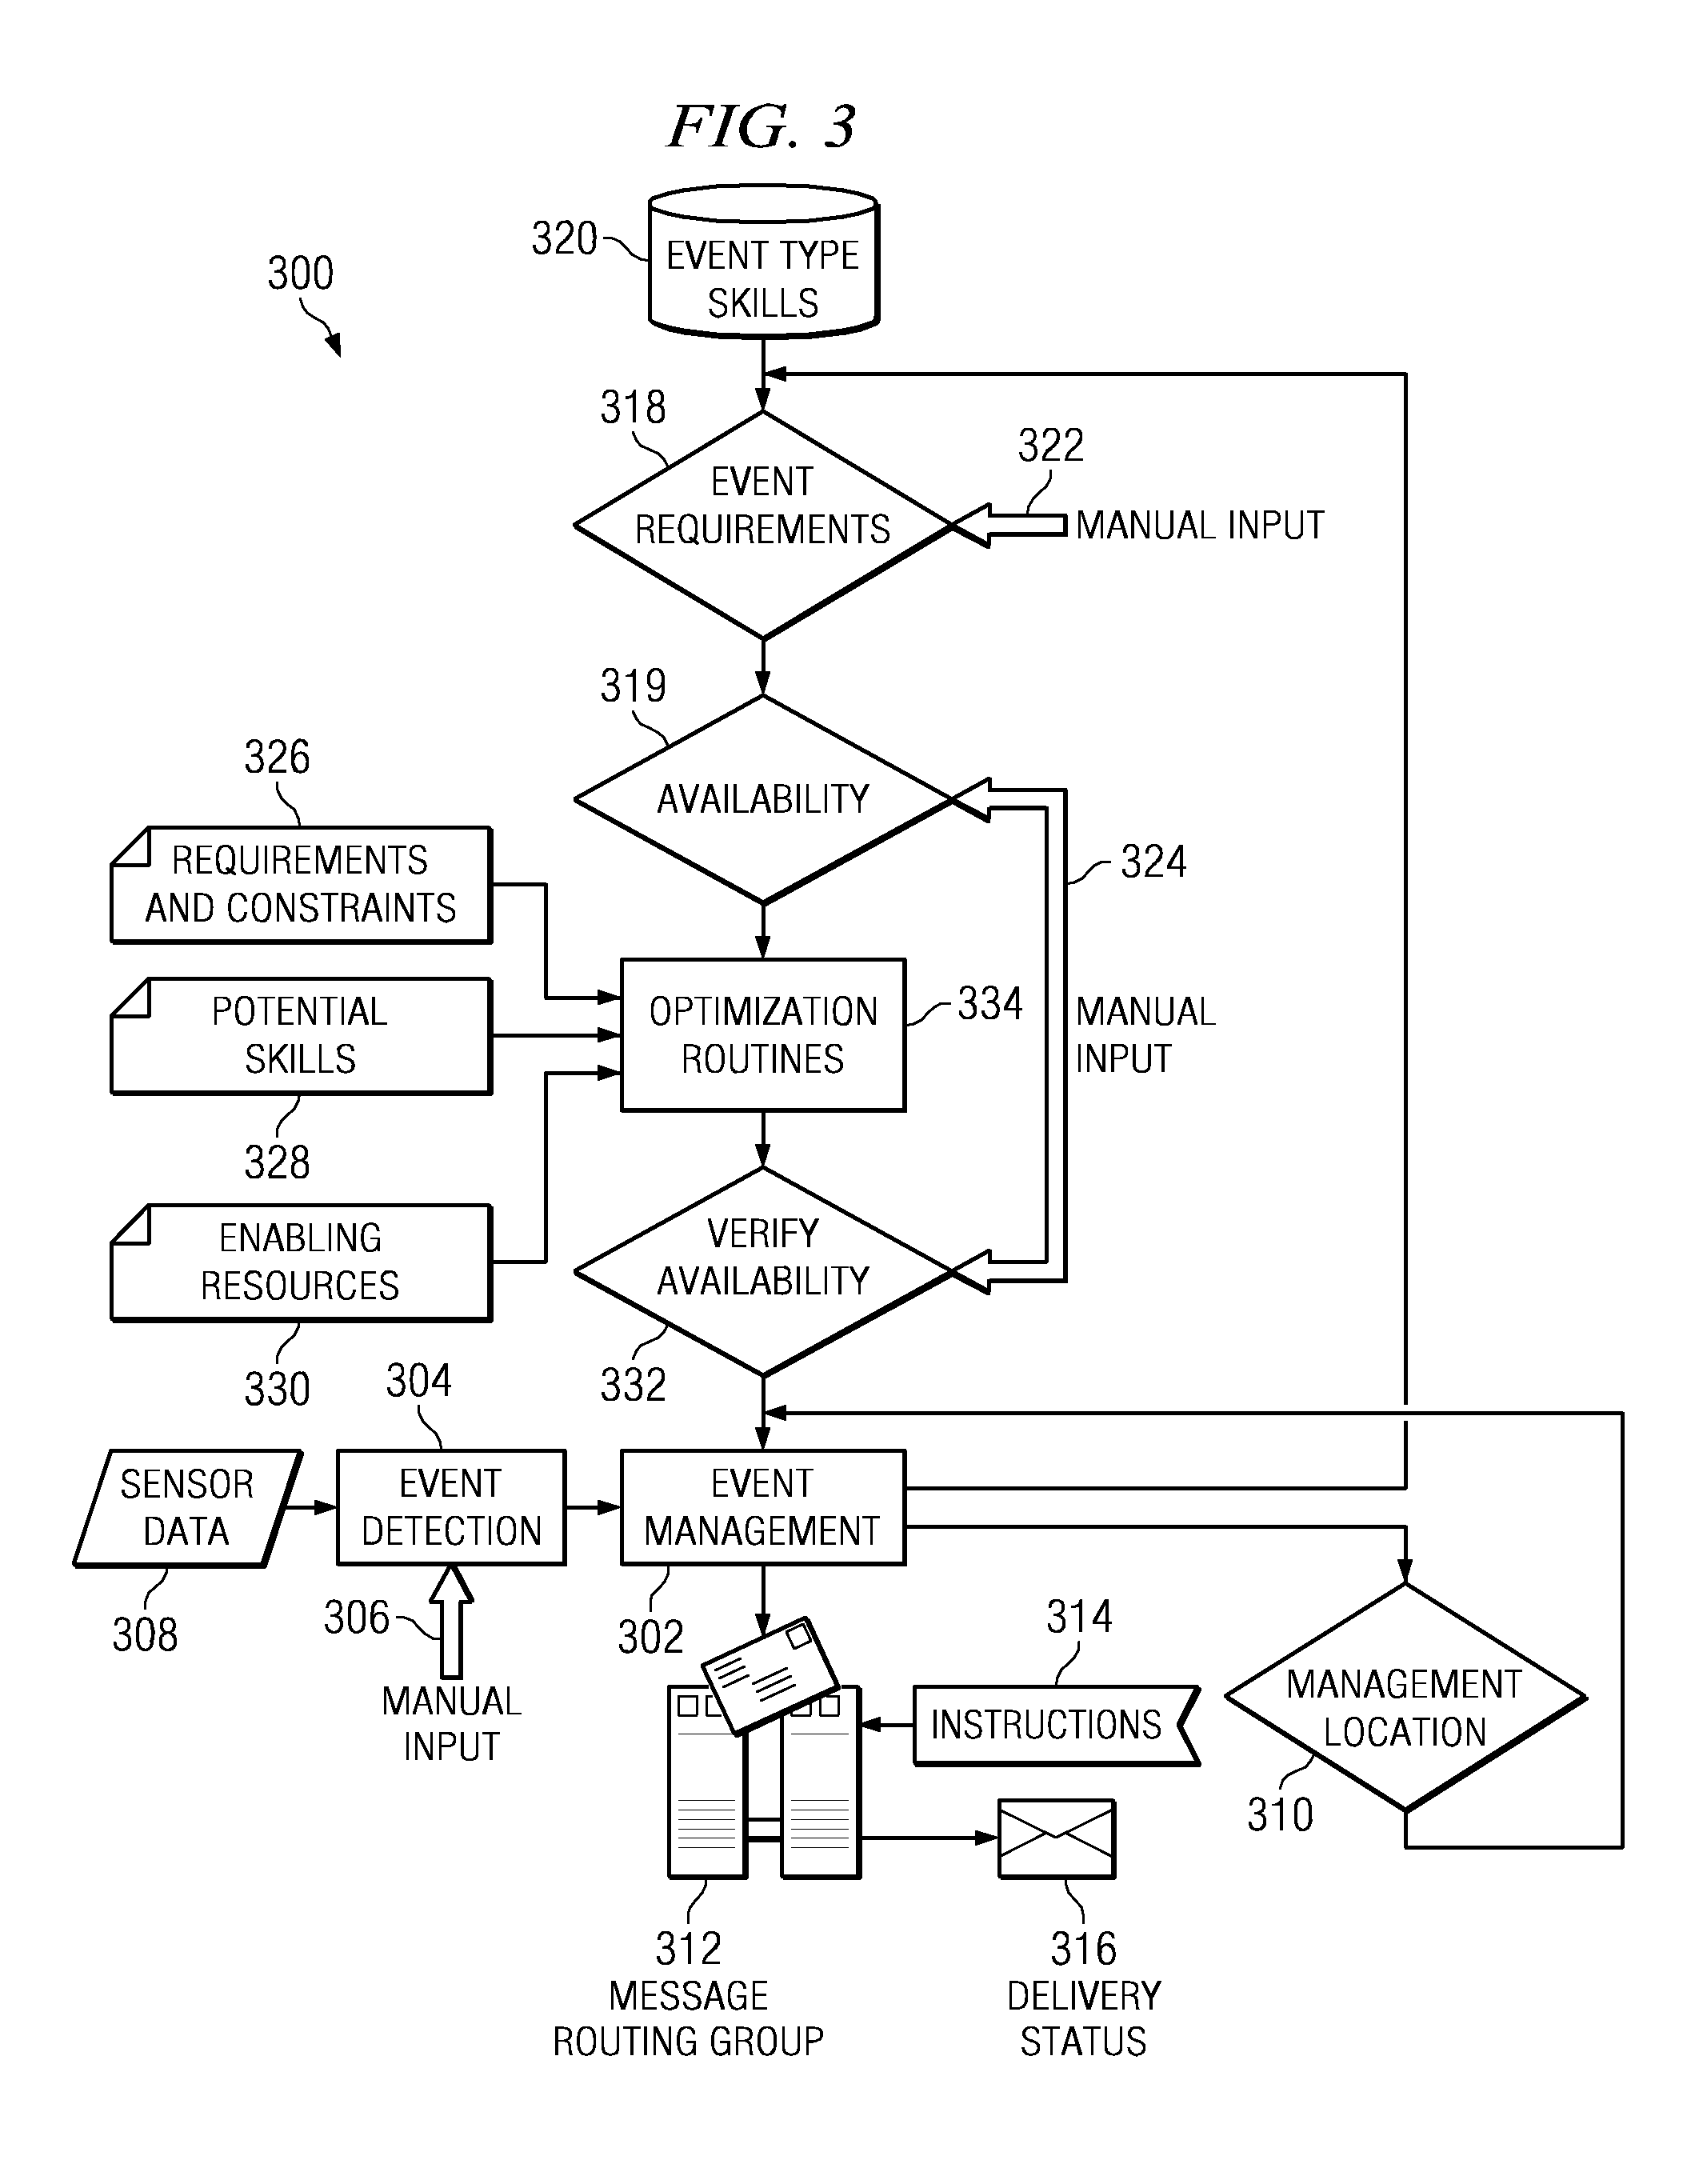 System and method for optimal and adaptive process unification of decision support functions associated with managing a chaotic event